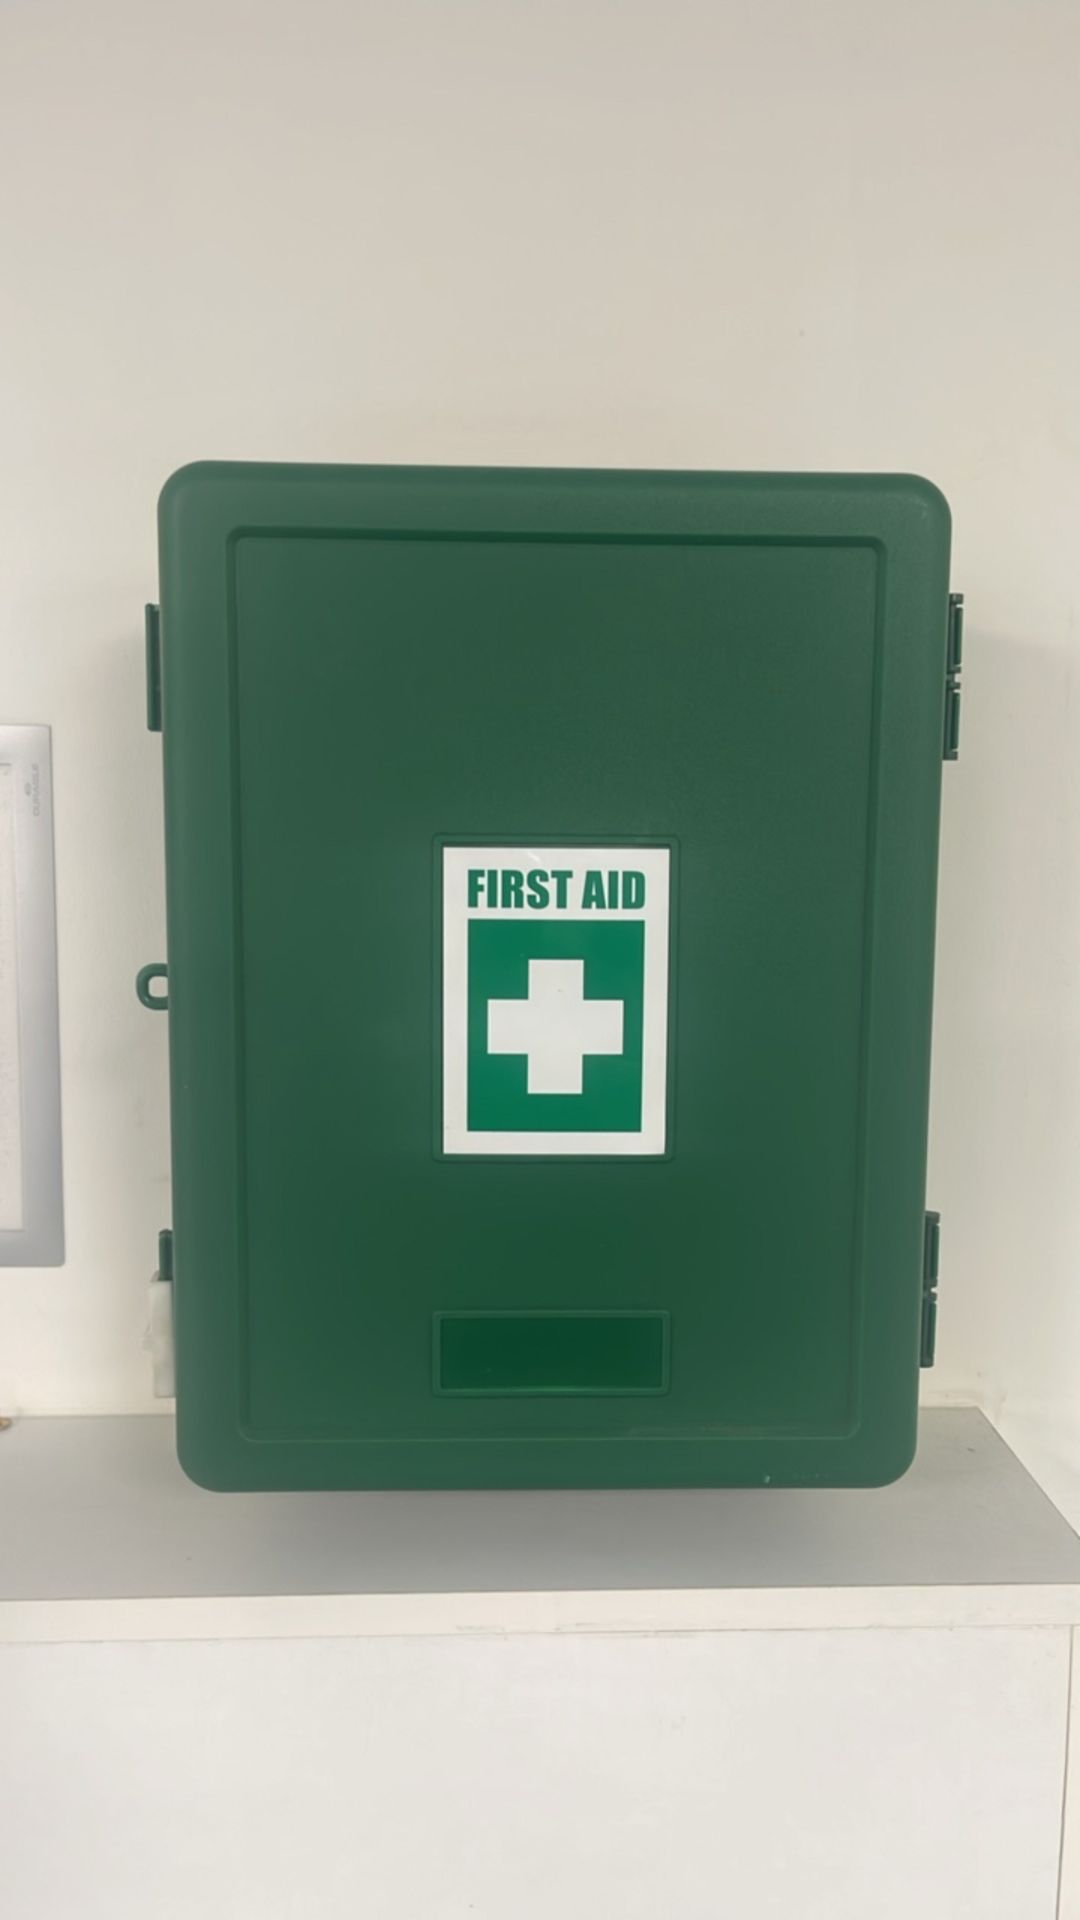 First Aid / Eye Wash Station - Image 2 of 5